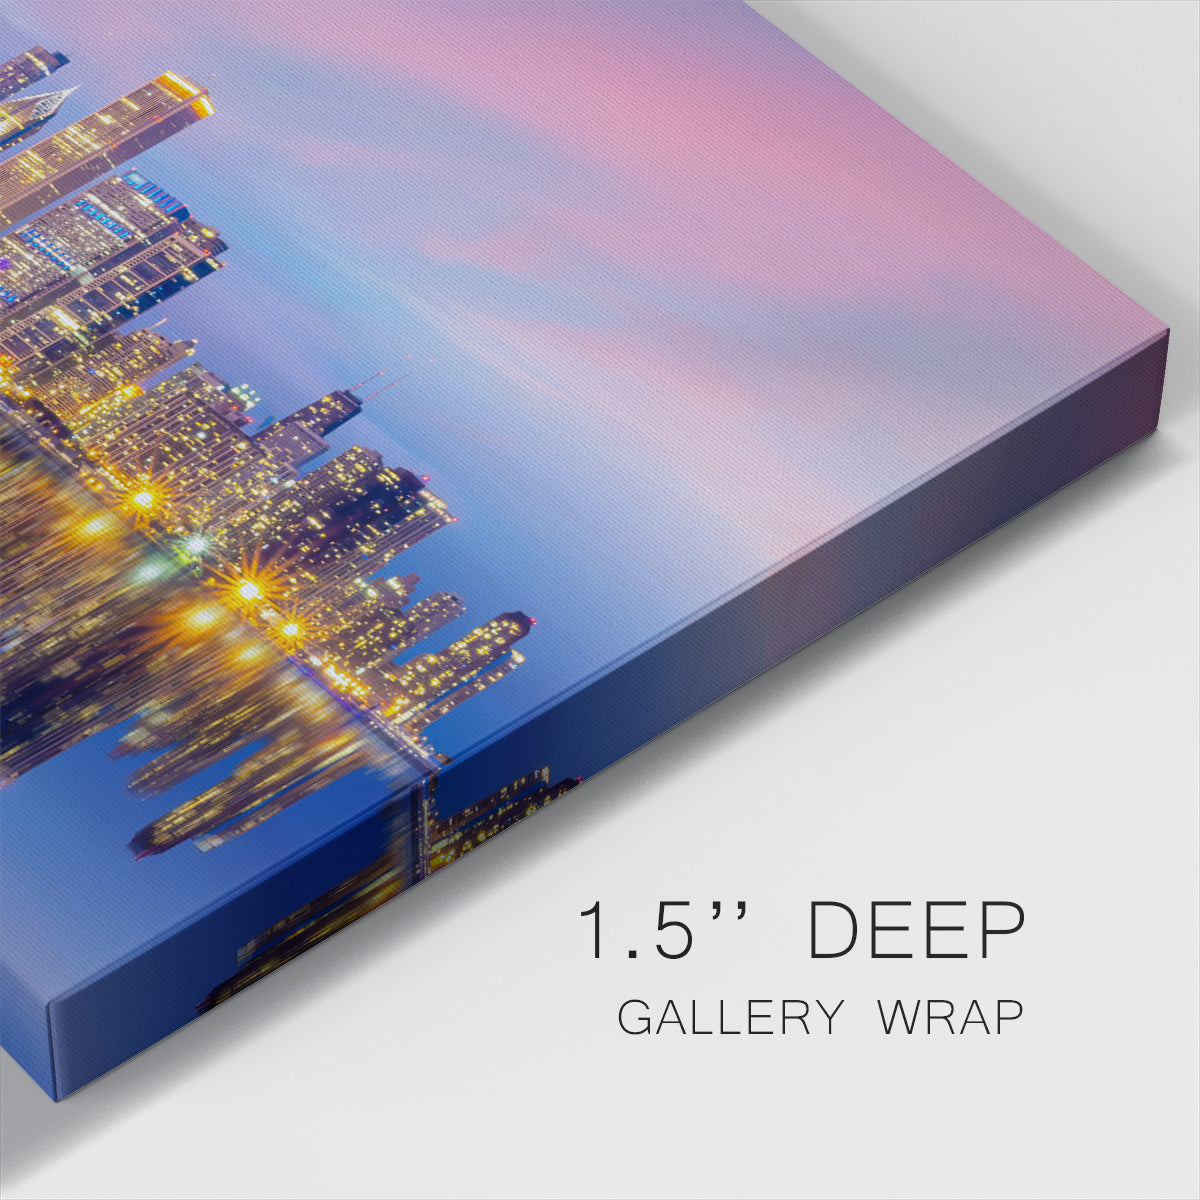 Chicago Skyline VI - Gallery Wrapped Canvas